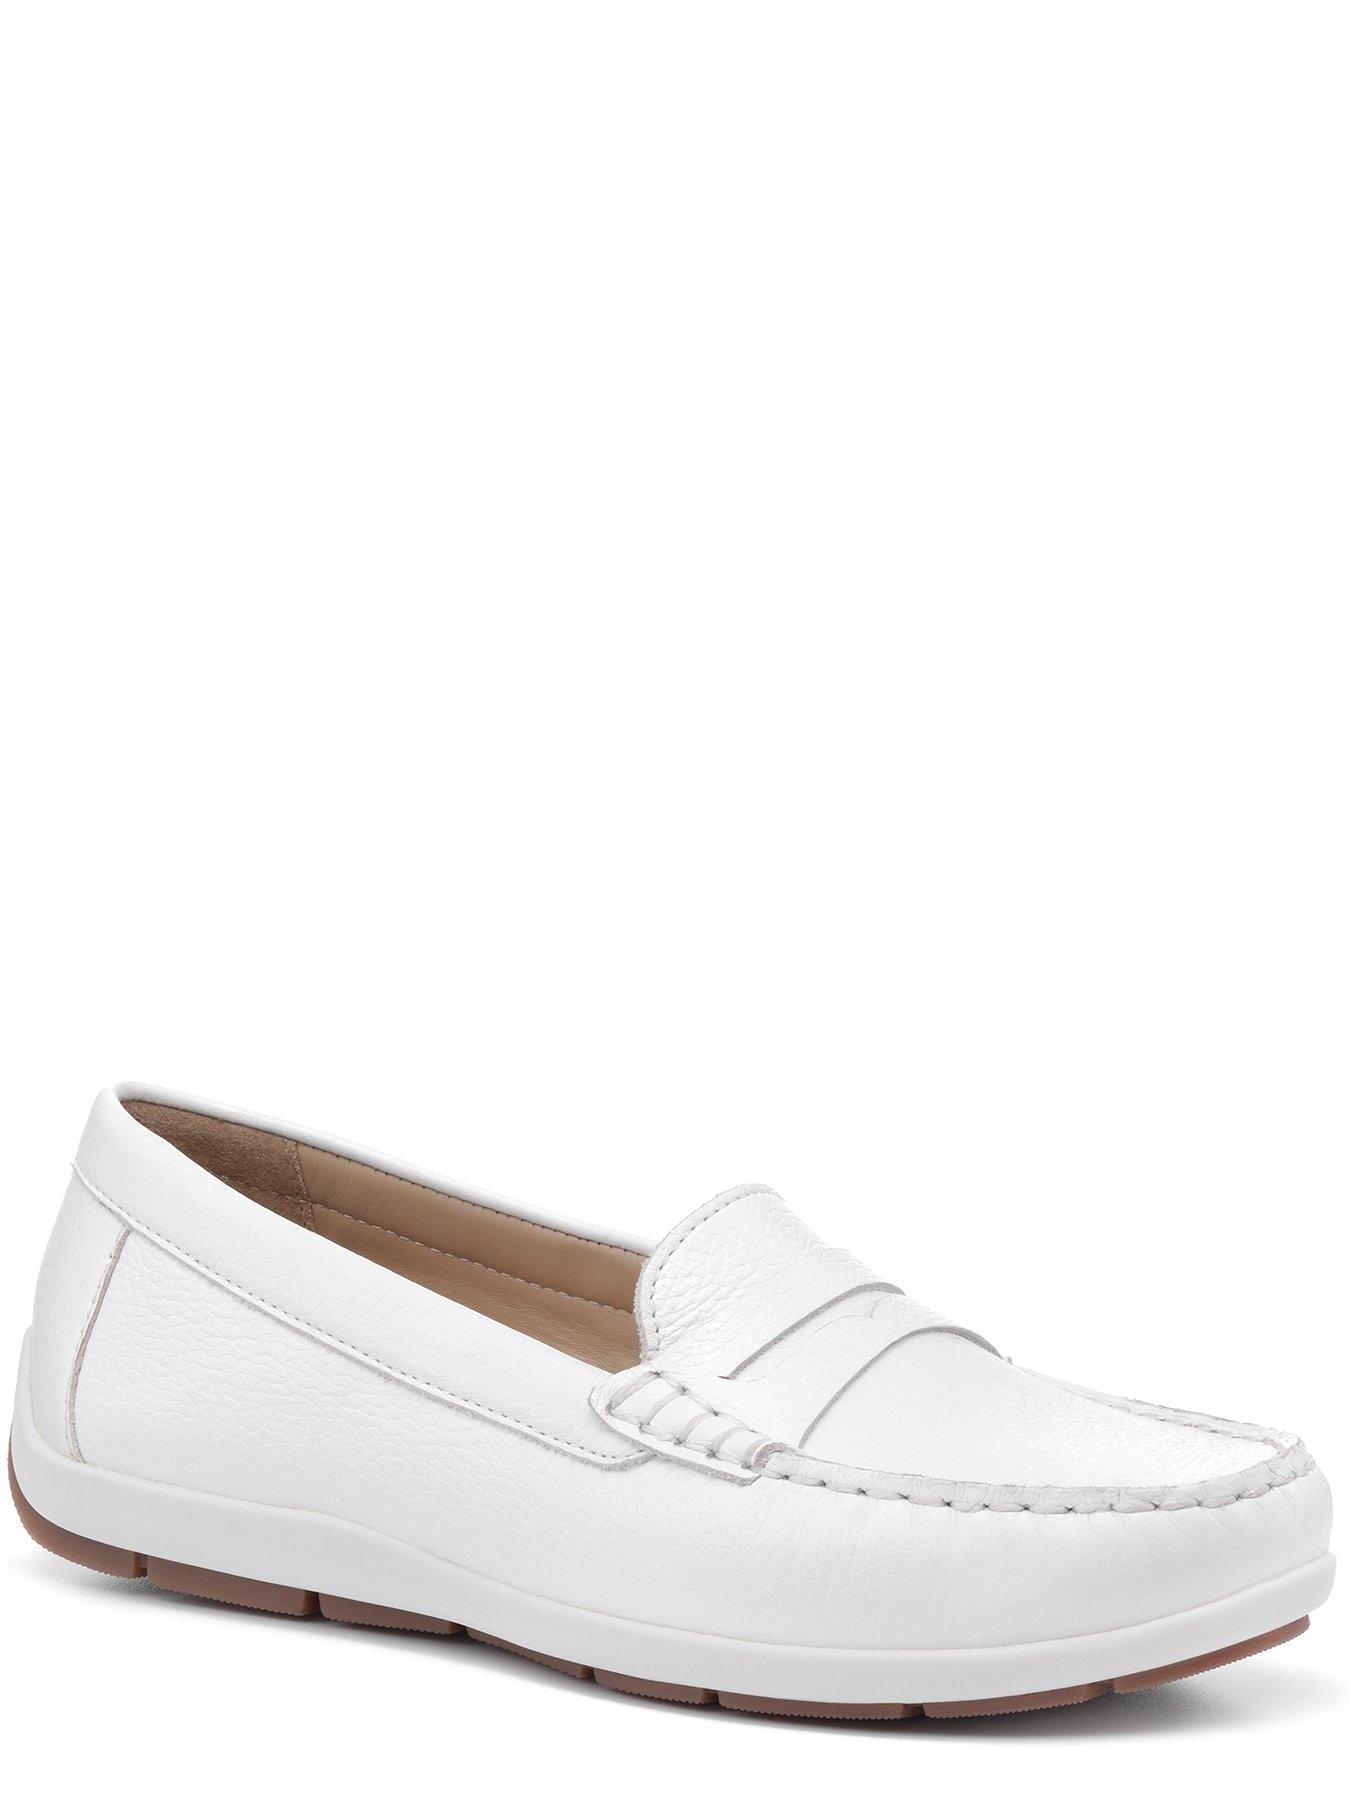 Hotter Pier Leather Smart Loafers - White very.co.uk